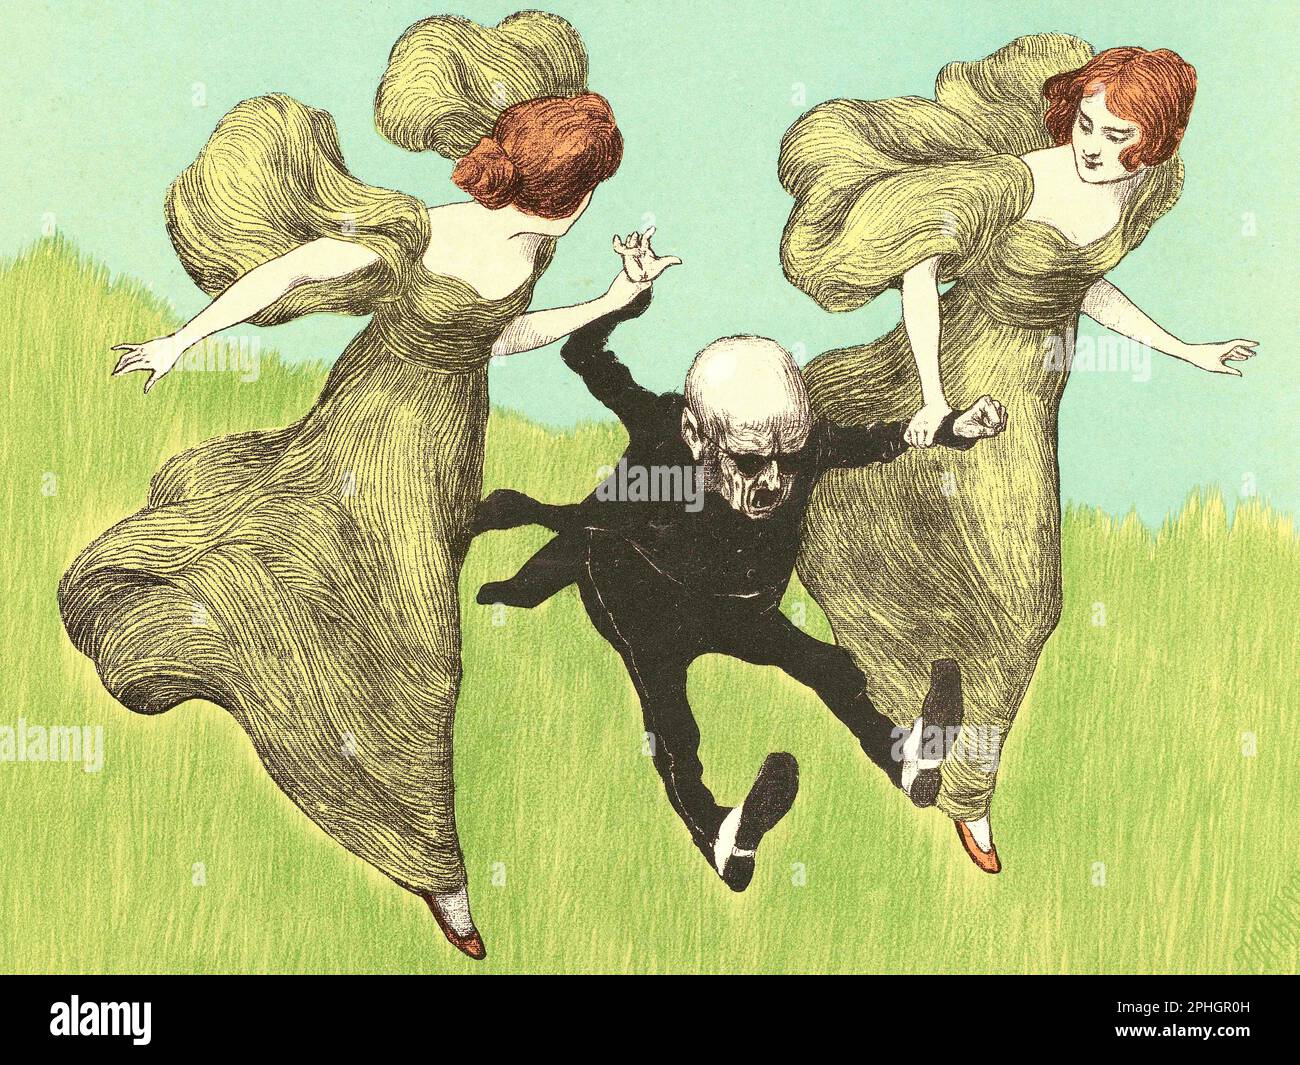 Ludwig von Zumbusch -Artwork (cropped) for the Jugend magazine - 1896 - Two redheads running down a hill with a little man between them. Stock Photo